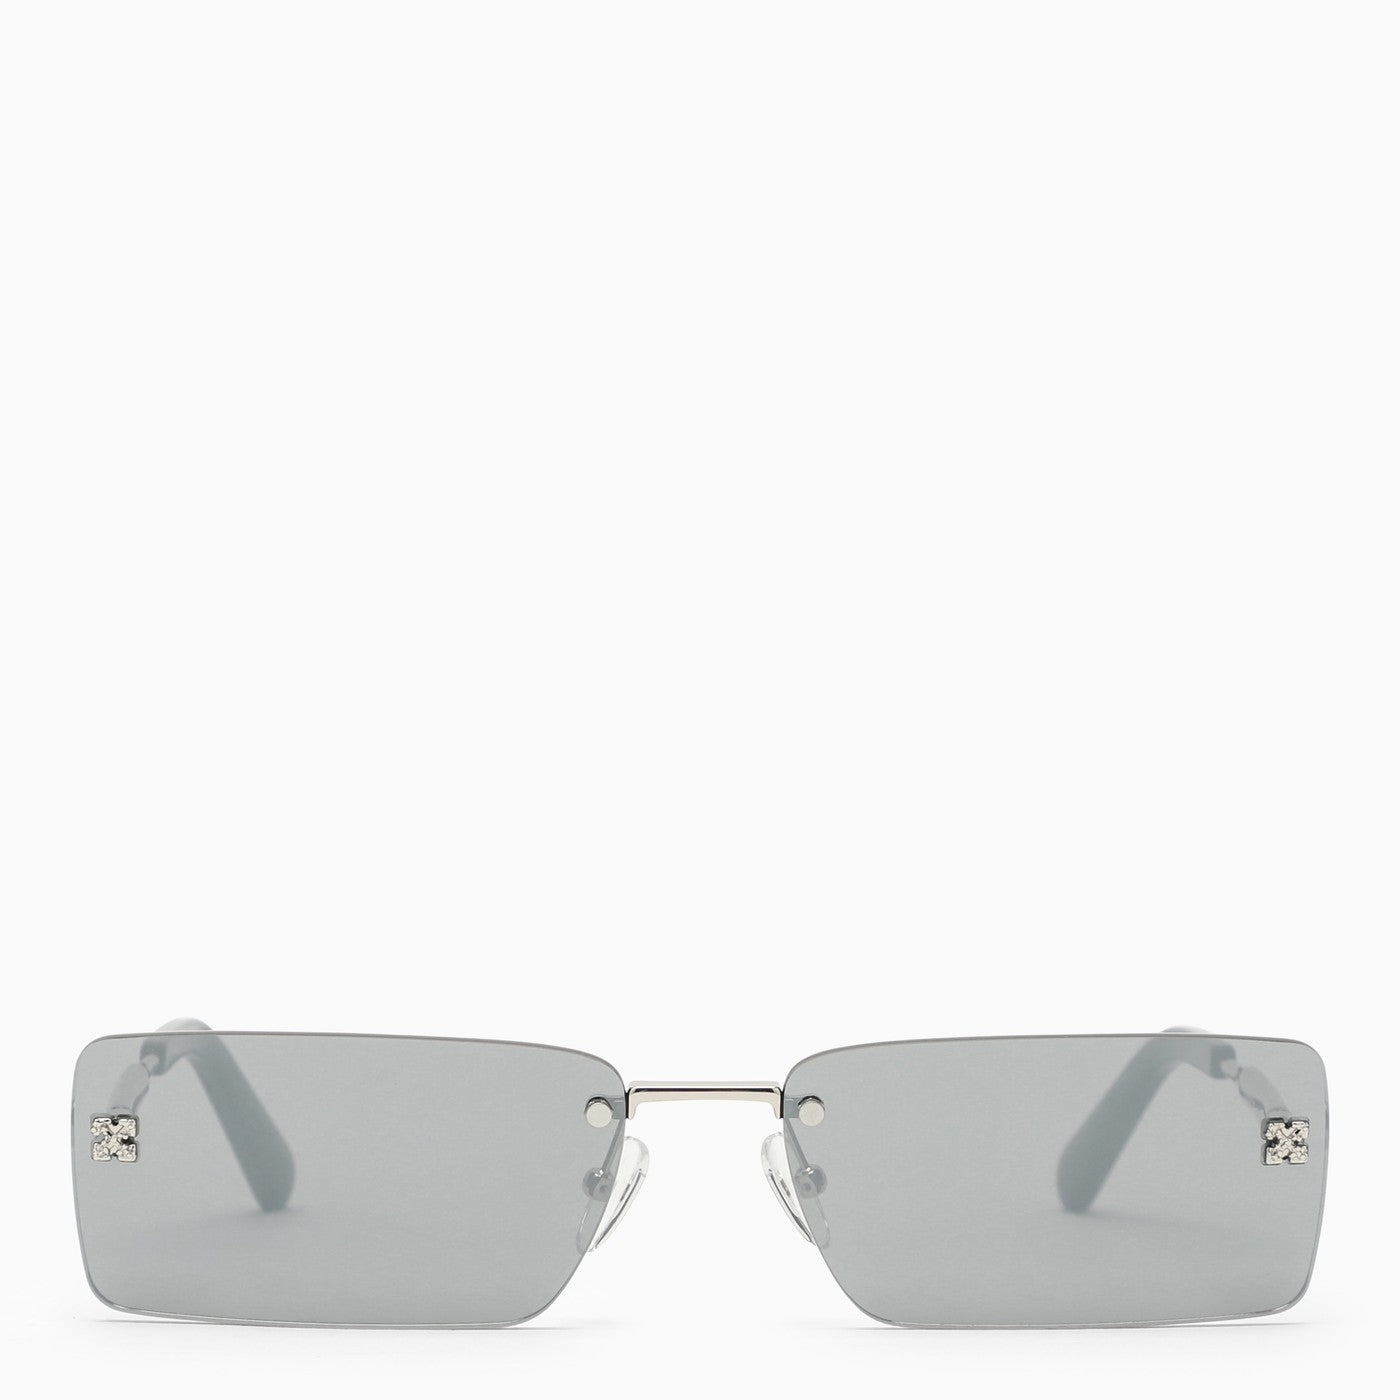 Off White™ Silver Metal Sunglasses - One size